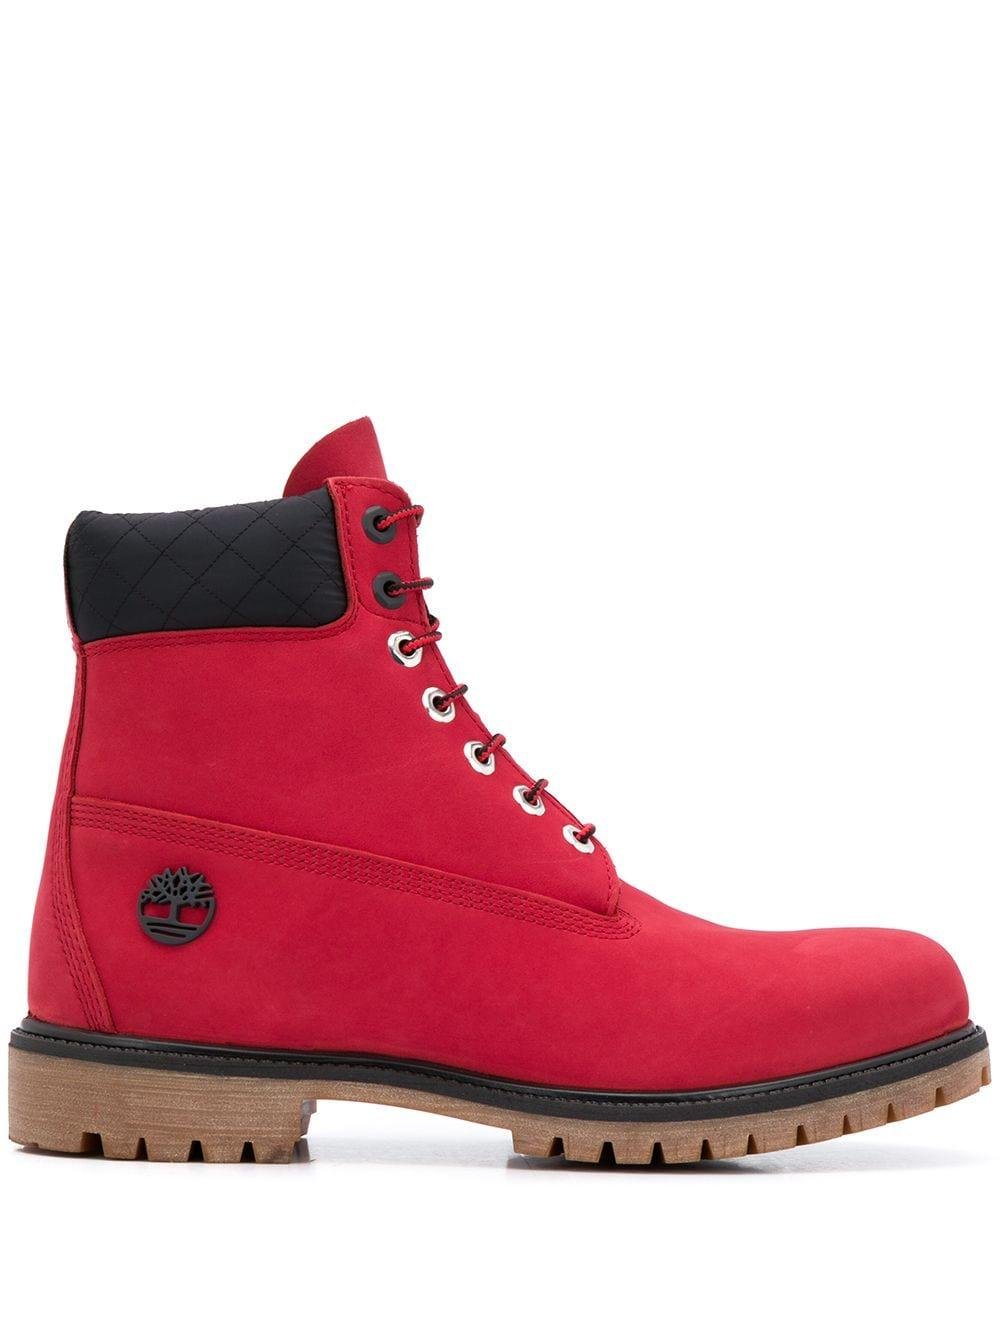 Timberland Leather Chicago Bulls 6-inch Boots in Red for Men - Lyst